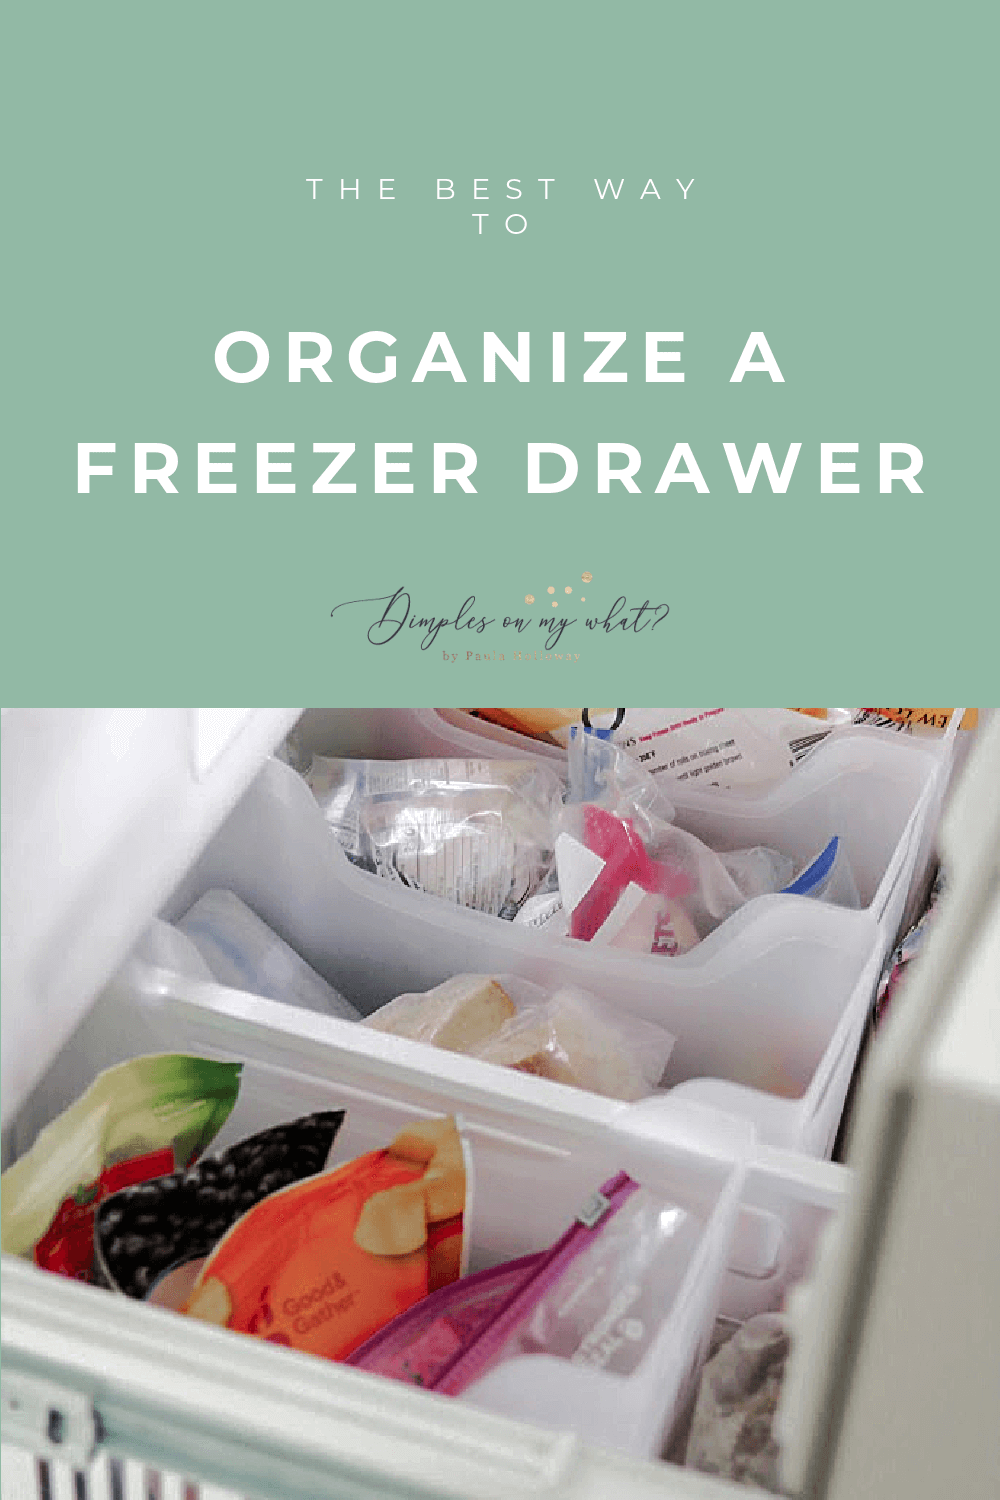 HOW TO ORGANIZE FREEZER DRAWERS - dimplesonmywhat